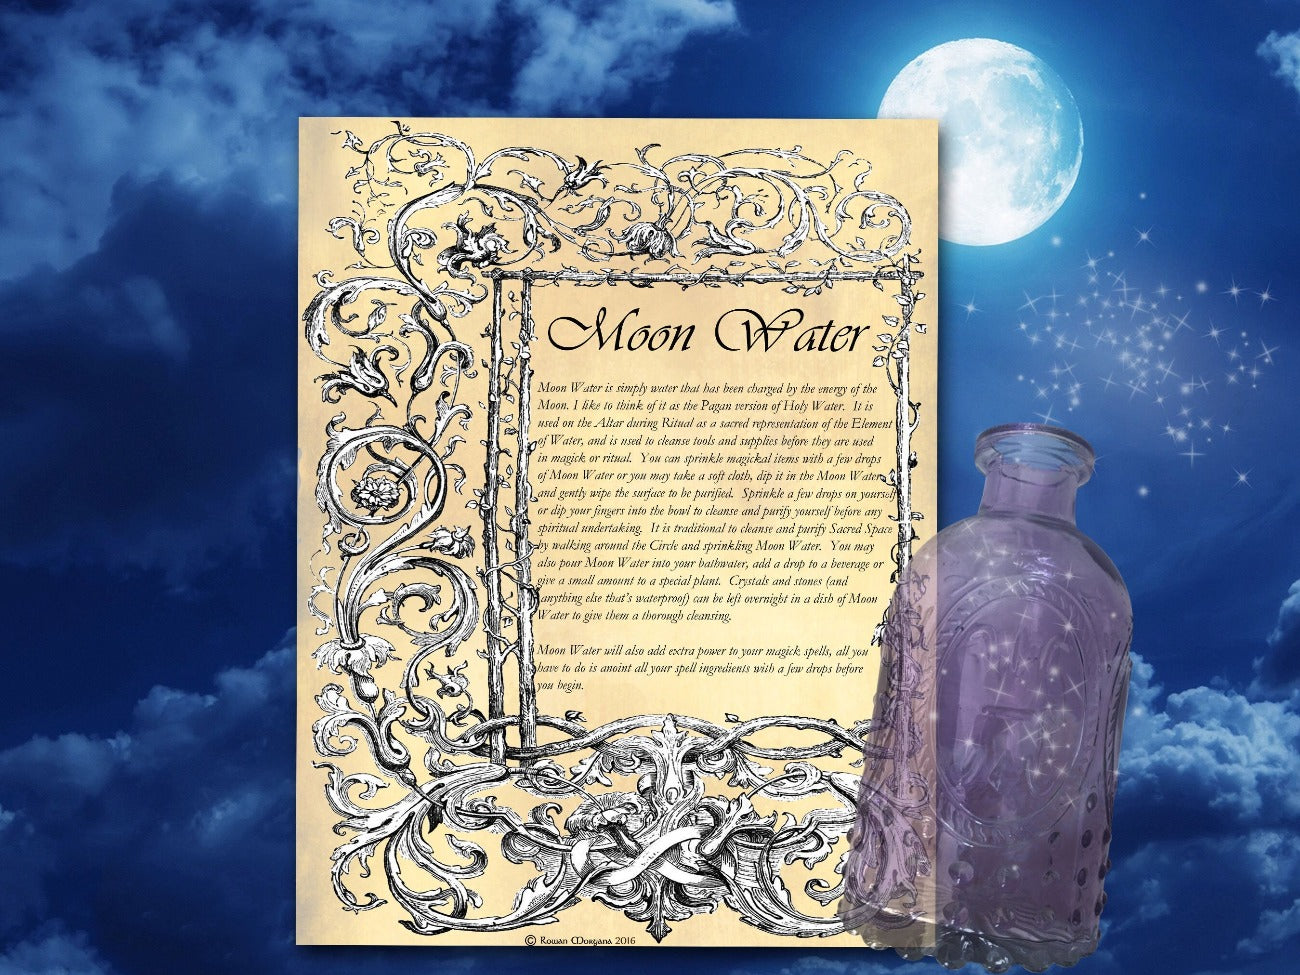 MOON WATER Recipe, 3 Pages Digital Download, Wicca Water Blessing, How to Make Moon Water, Moon Water Potion, Lunar Water, Wicca Holy Water - Morgana Magick Spell